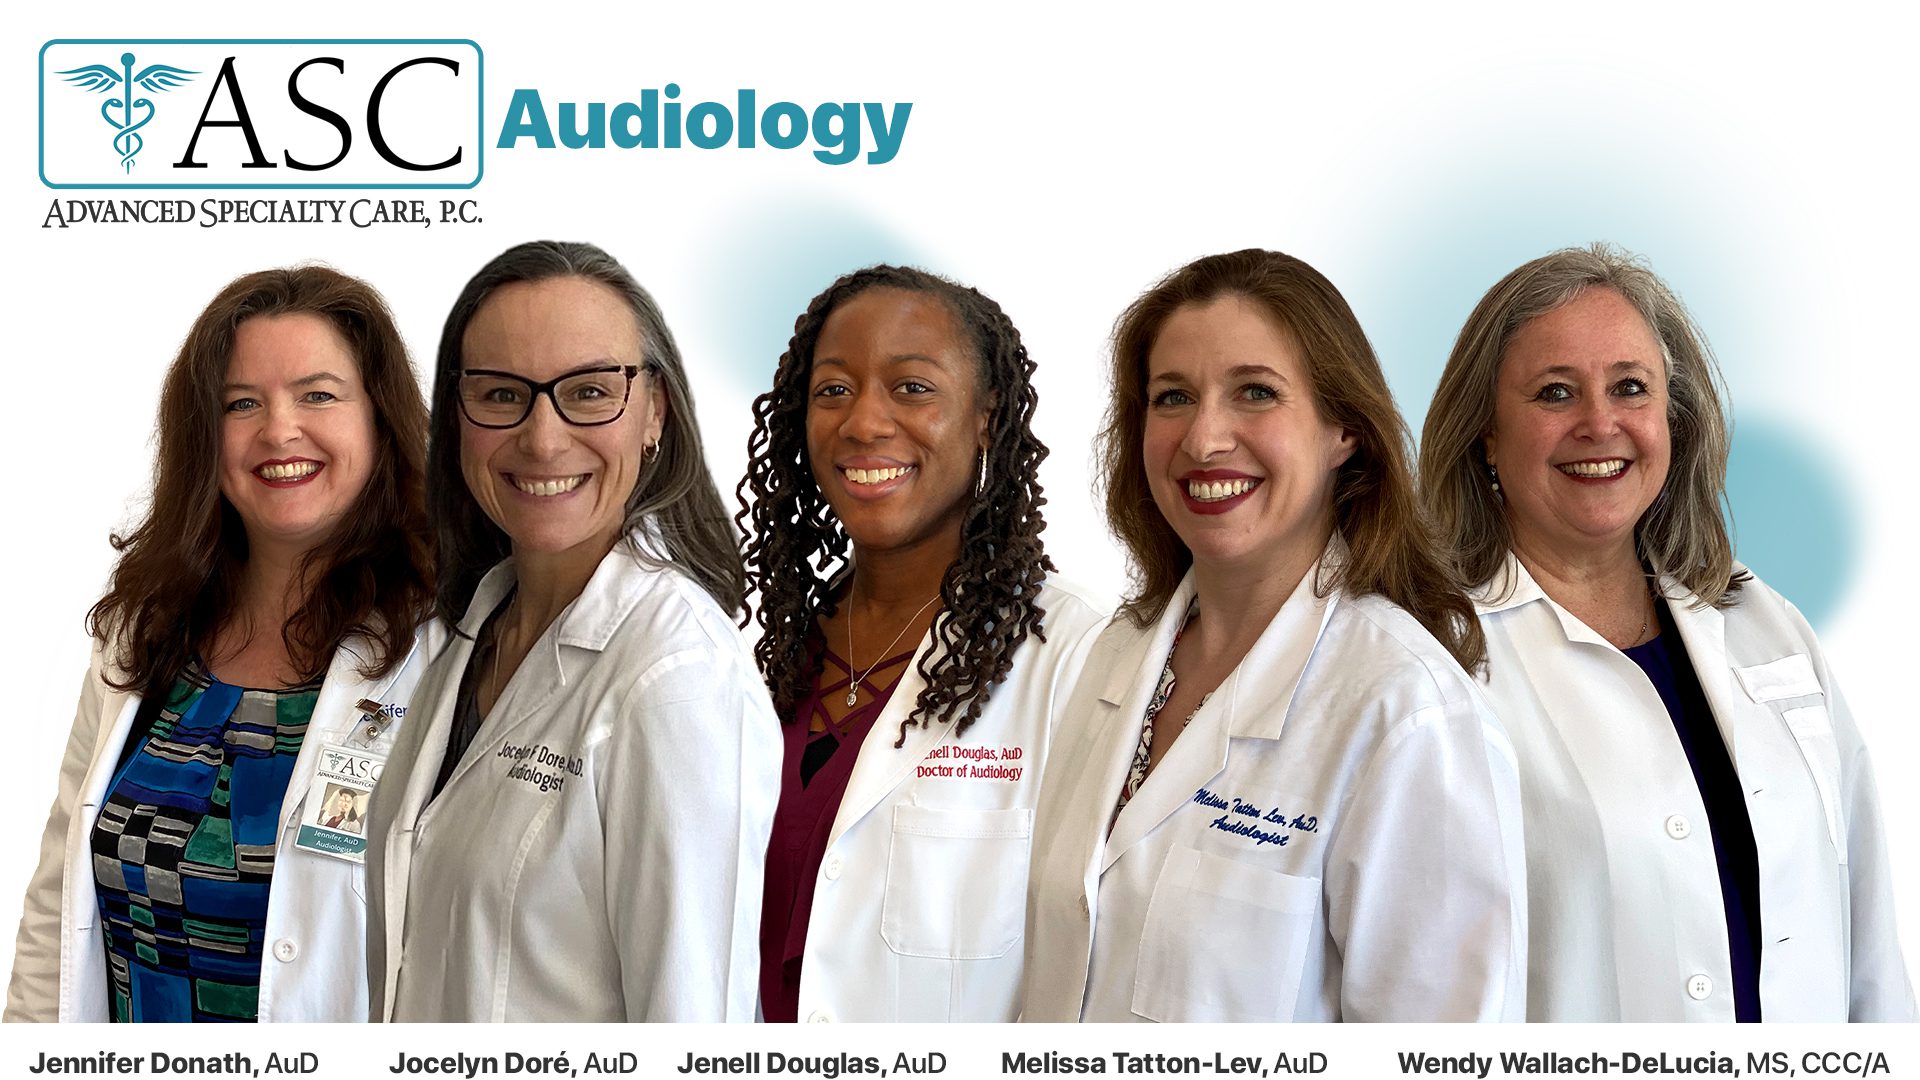 Advanced Specialty Care's Doctors of Audiology: Jennifer Donath (AuD), Jocelyn Doré (AuD), Jenell Douglas (AuD), Melissa Tatton-Lev (AuD), Wendy Wallach-DeLucia (MS, CCC/A). Offices conveniently located in Danbury, New Milford, Ridgefield & Norwalk, Connecticut.